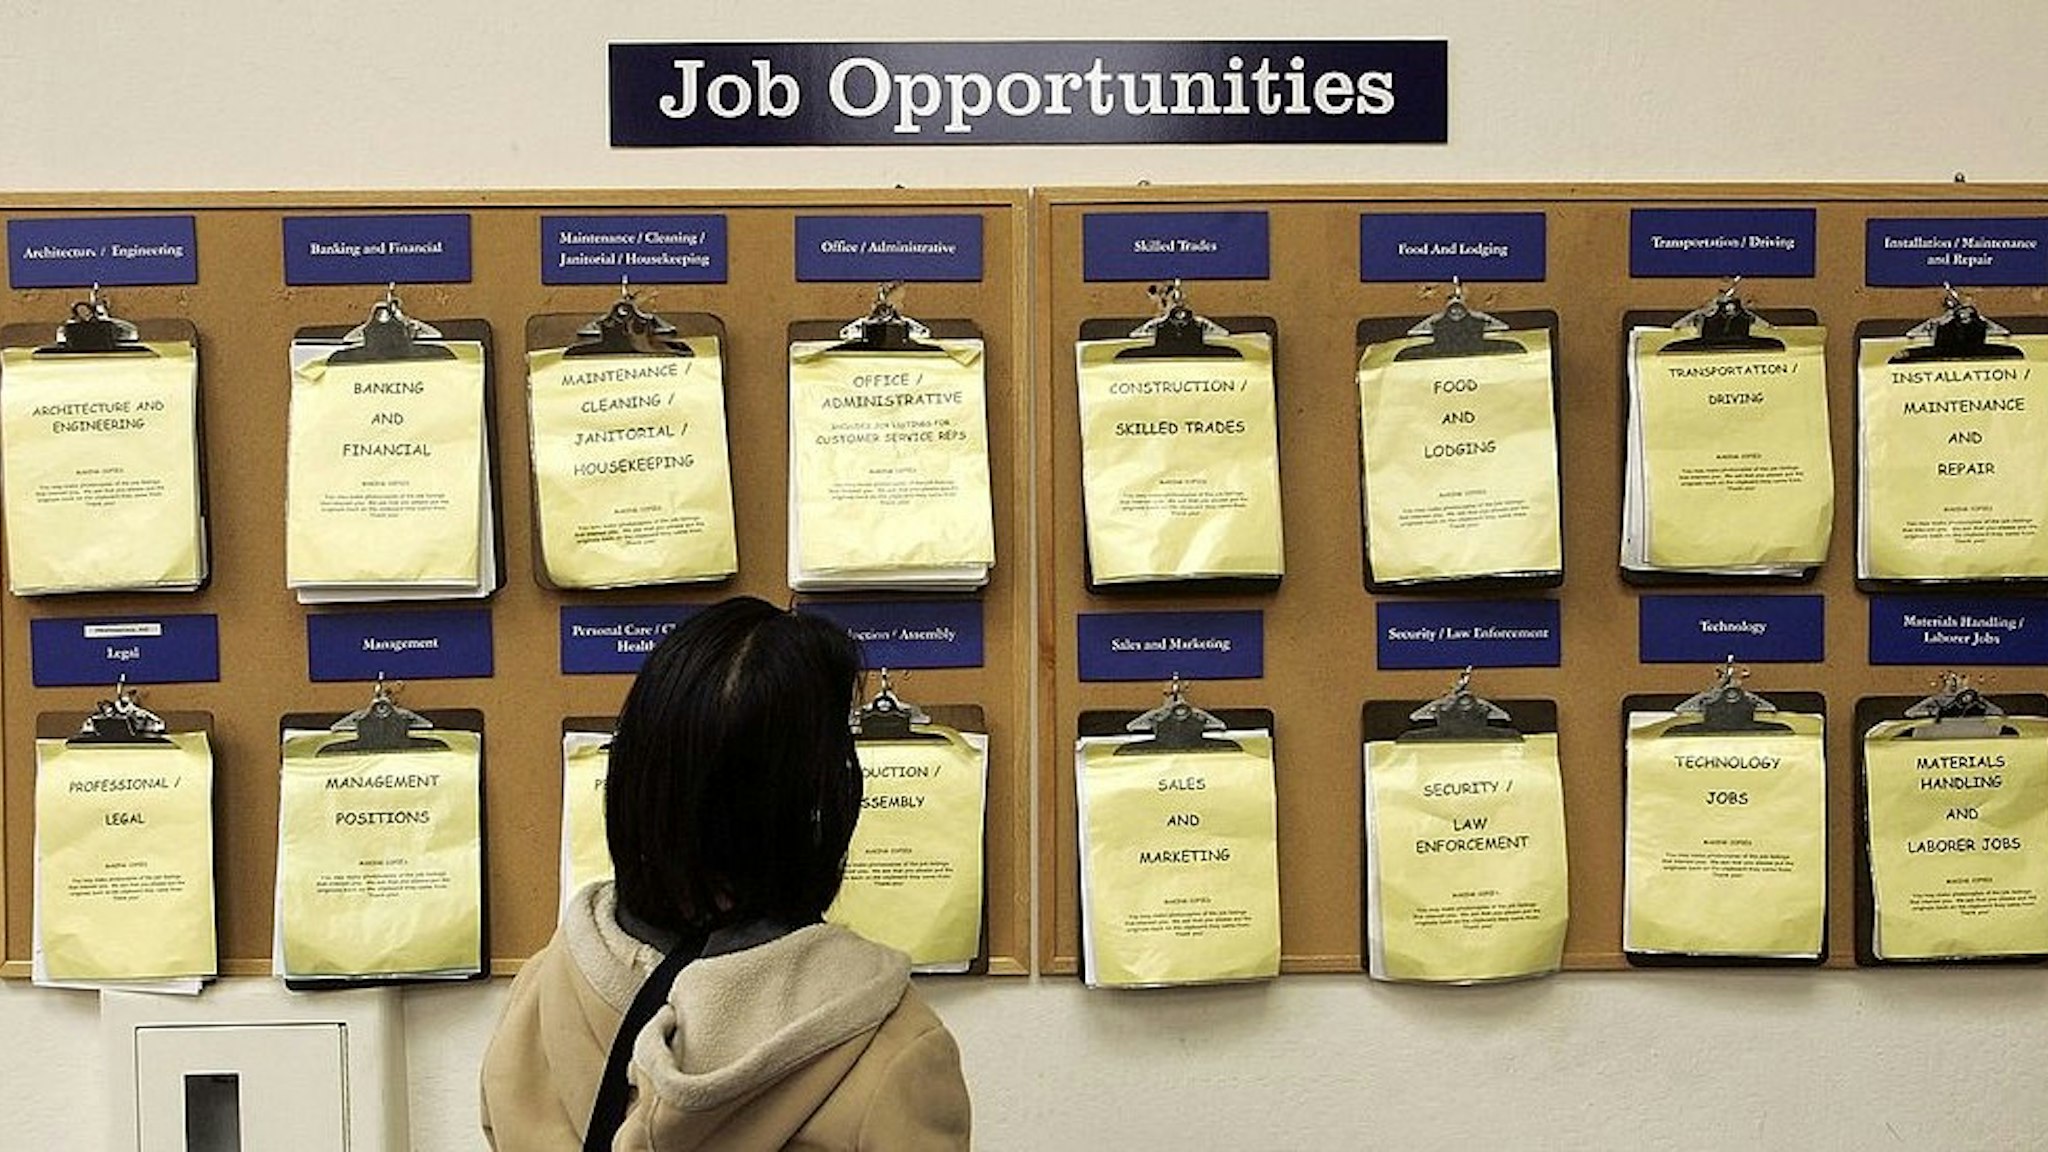 OAKLAND, CA - FEBRUARY 02: A job seeker looks at a job listing board at the East Bay Career Center February 2, 2006 in Oakland, California. According to a government report, U.S. unemployment benefits claims dropped to about 273,000 last week, sending a four-week average of claims to the lowest level in nearly six years. (Photo by